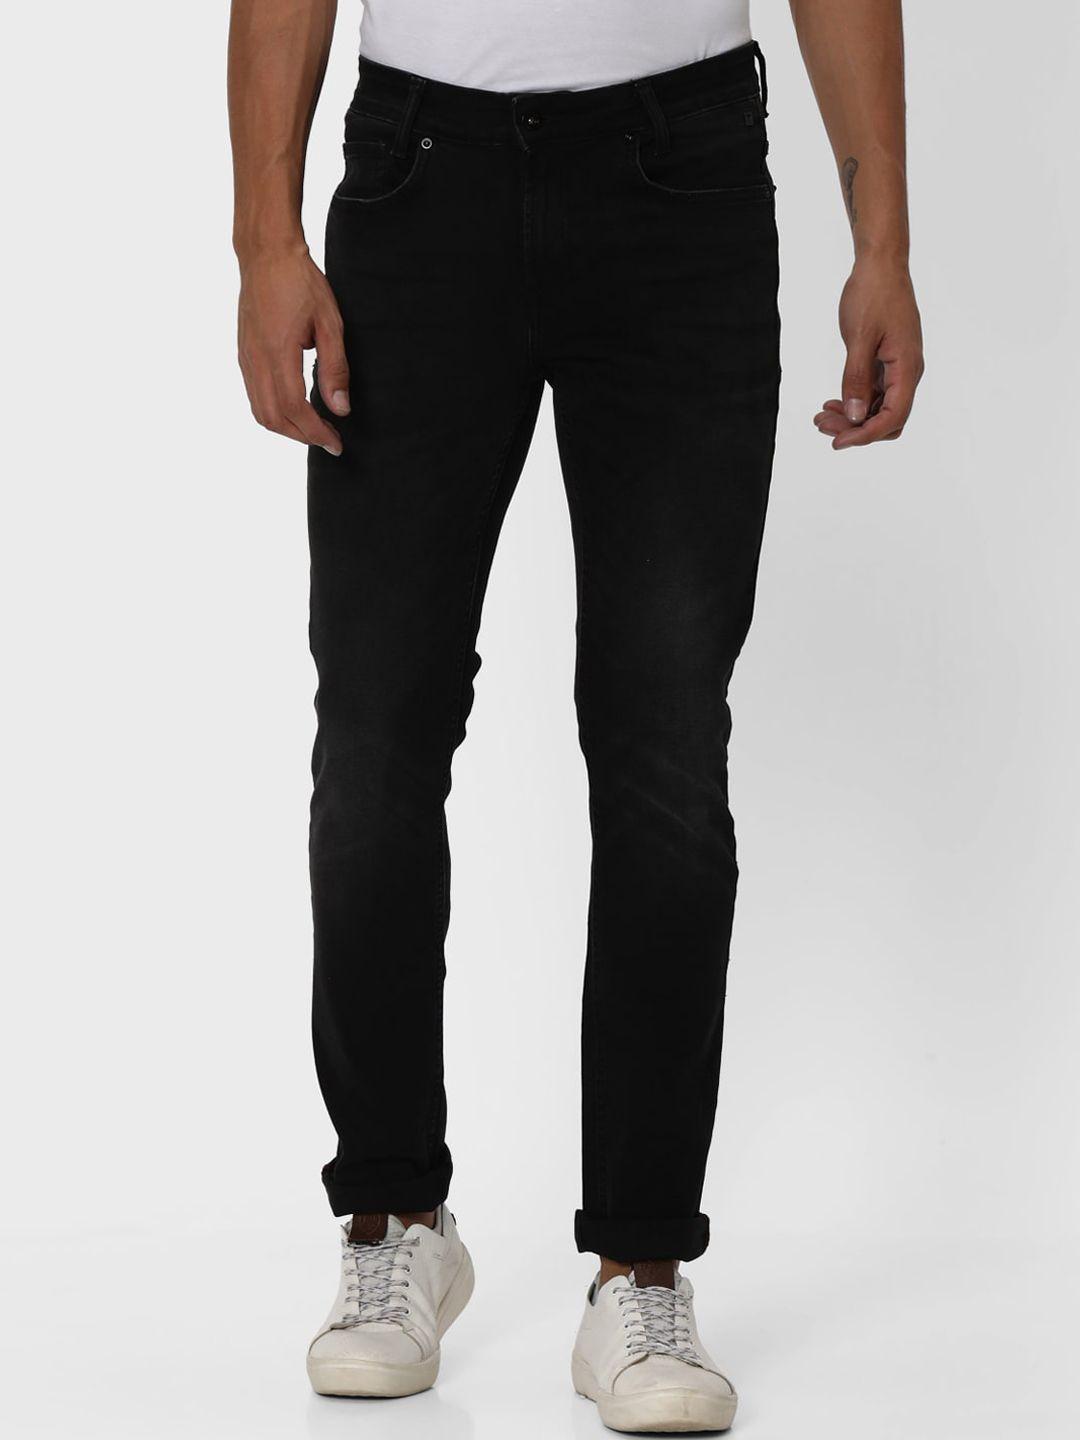 mufti-men-slim-fit-stretchable-jeans